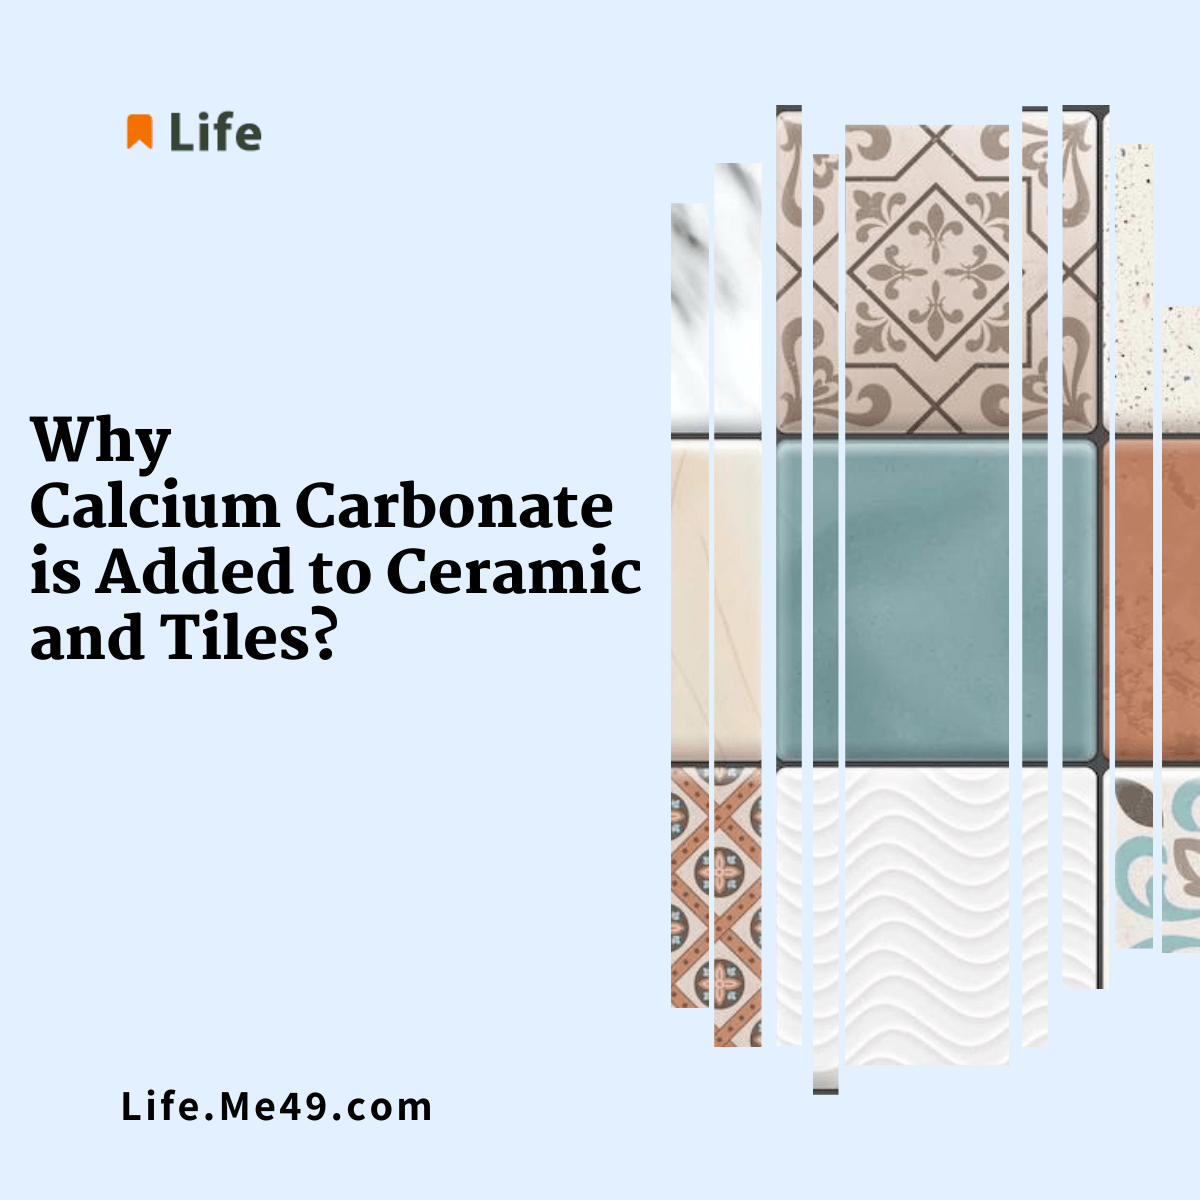 Why Calcium Carbonate is Added to Ceramic and Tiles